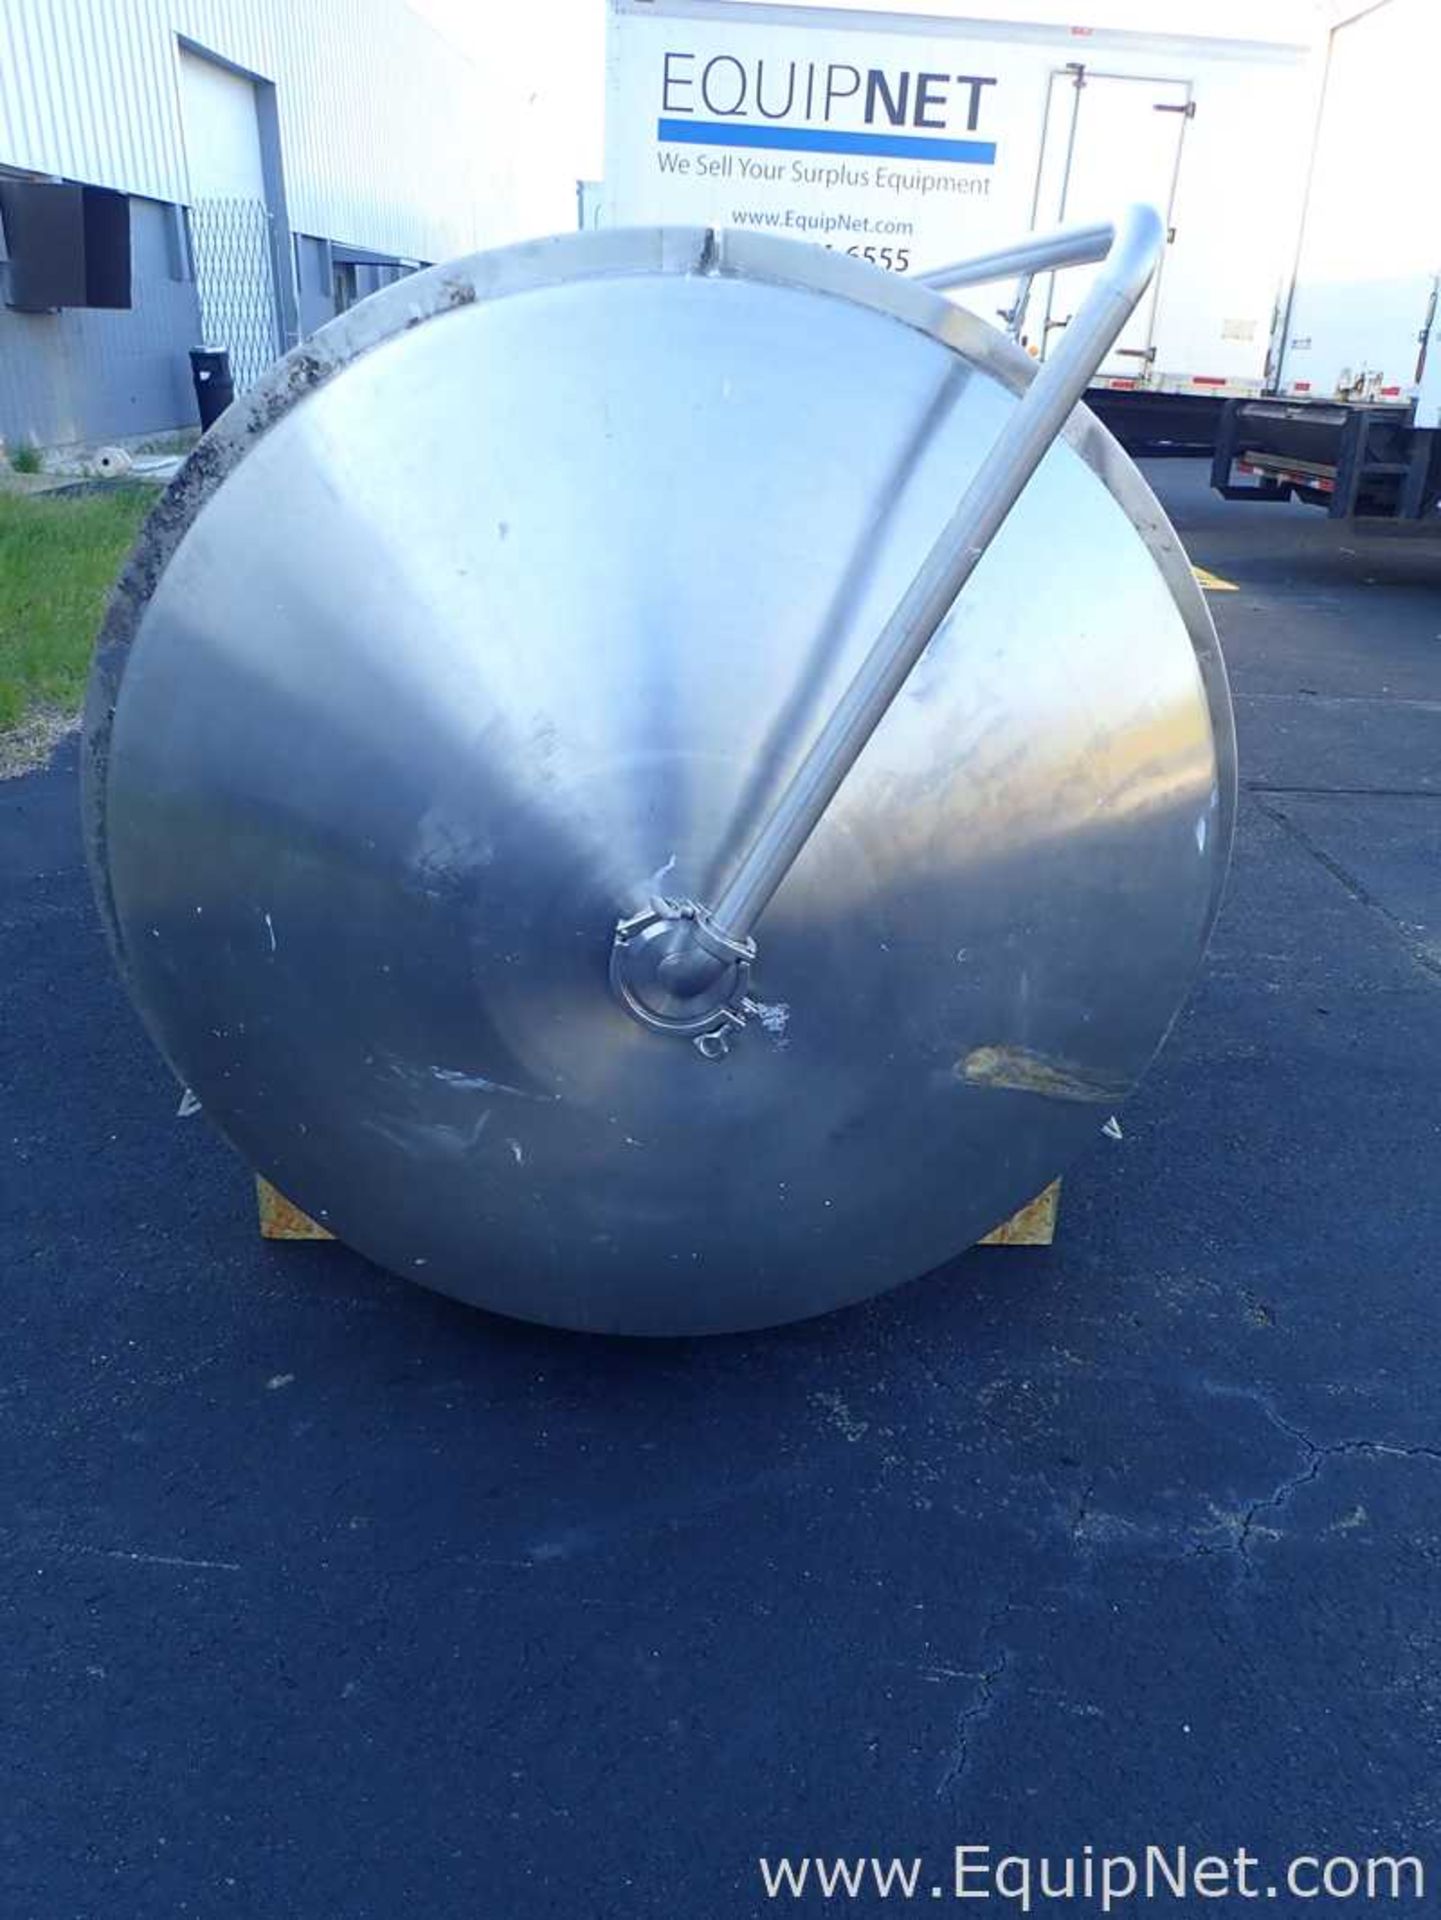 Specific Mechanical Approximately 600 Gallon Stainless Steel Jacketed Brew Tank - Image 6 of 12